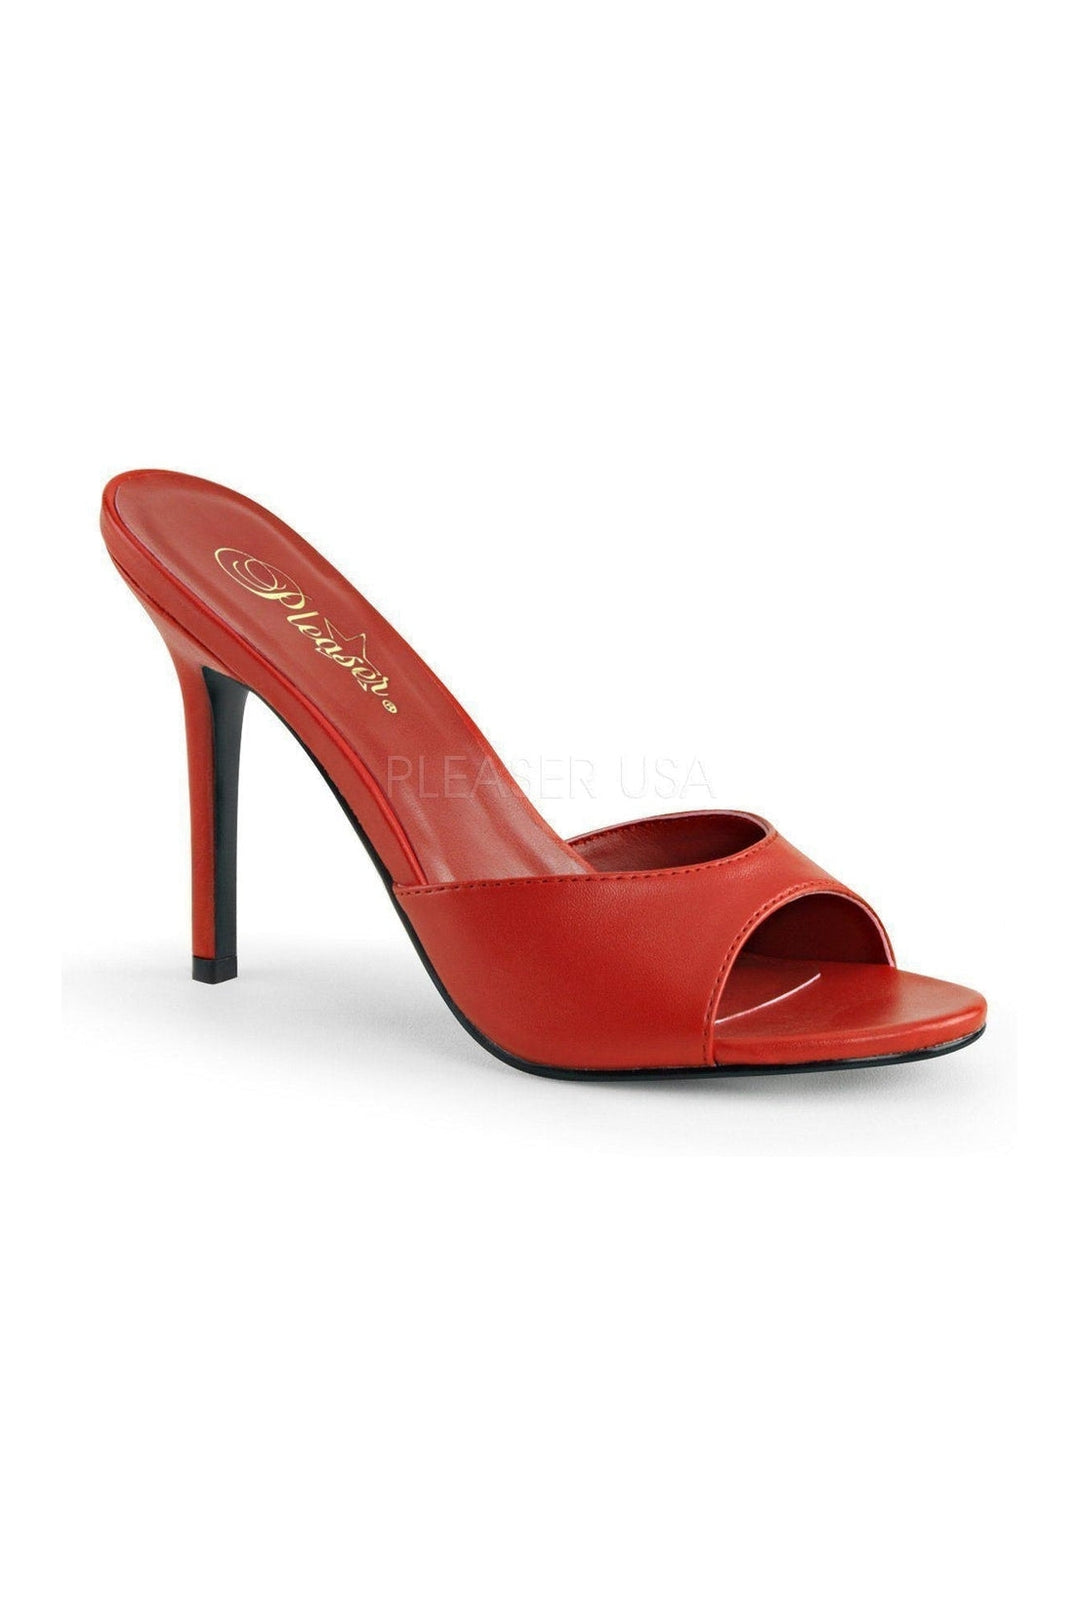 CLASSIQUE-01 Slide | Red Faux Leather-Pleaser-Red-Slides-SEXYSHOES.COM